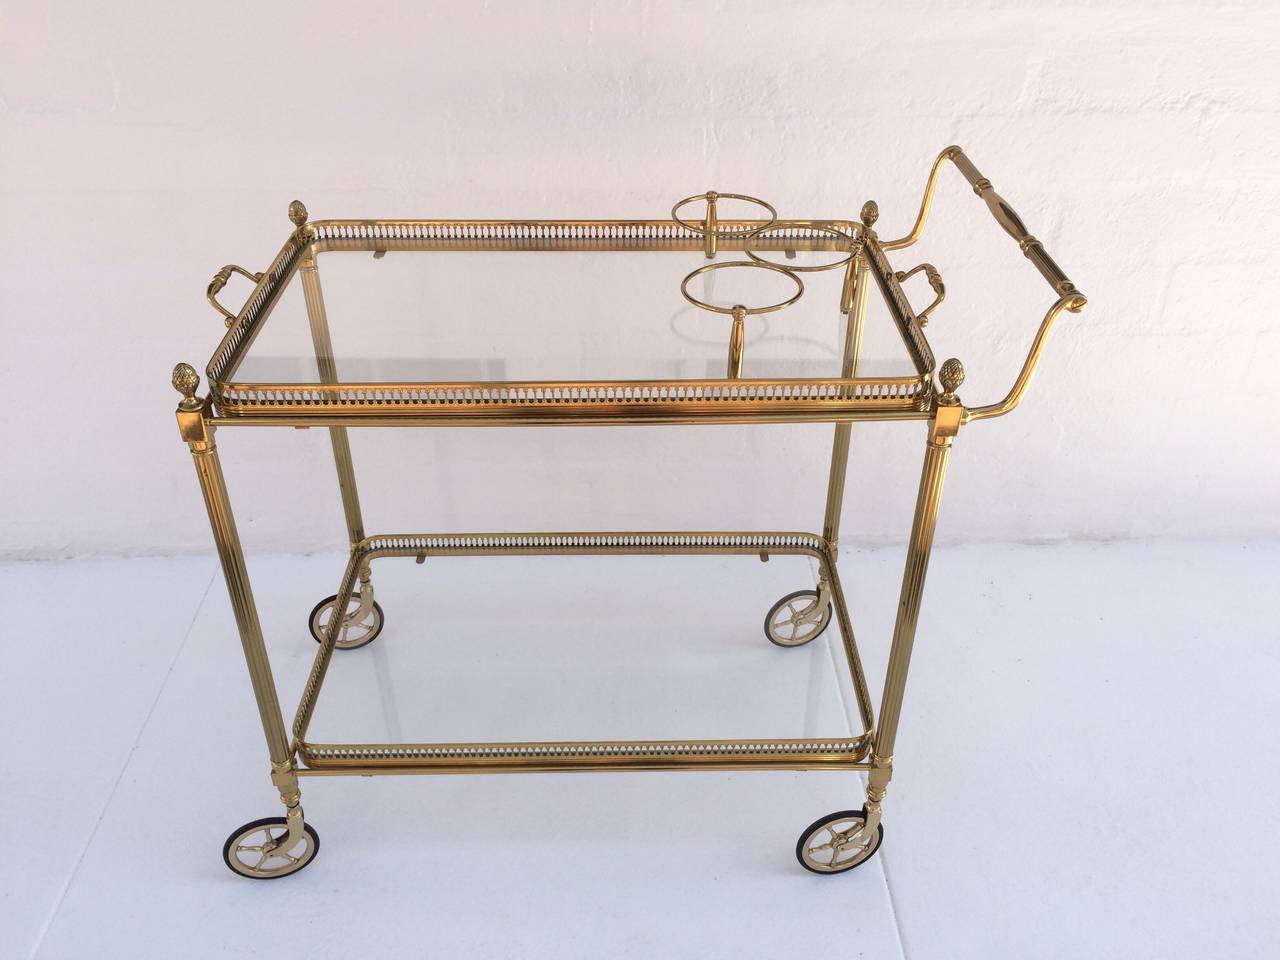 A very attractive 1960s French bar cart.
Solid polished brass with a removable top serving tray that has holders for three bottles.
Wheels are brass with black rubber tread for easy movement.